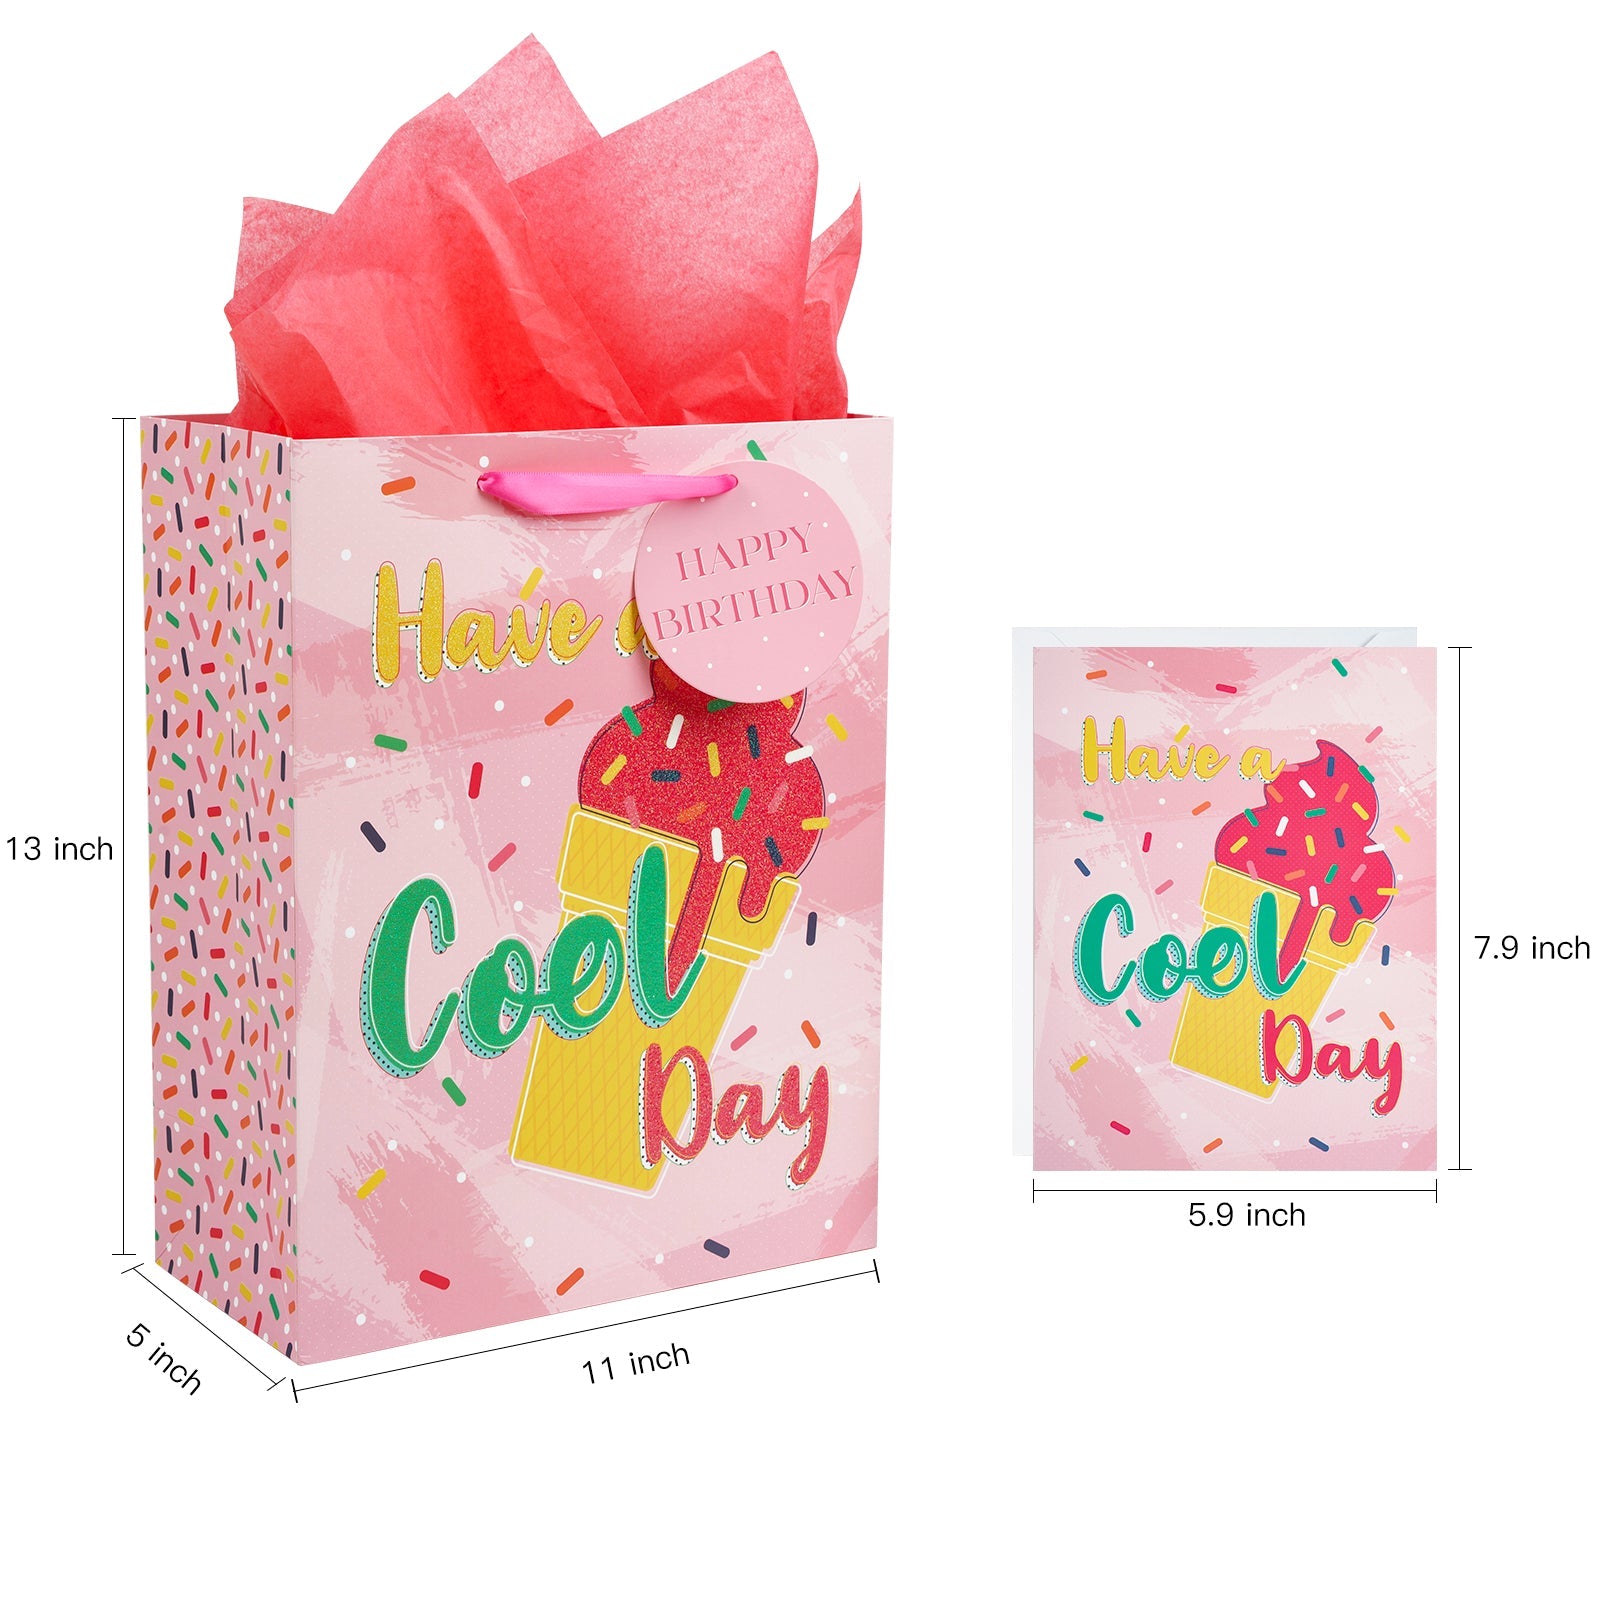 13 inch Large Gift Bag with Birthday Card  & Tissue Paper - Pink Icecream Patterns